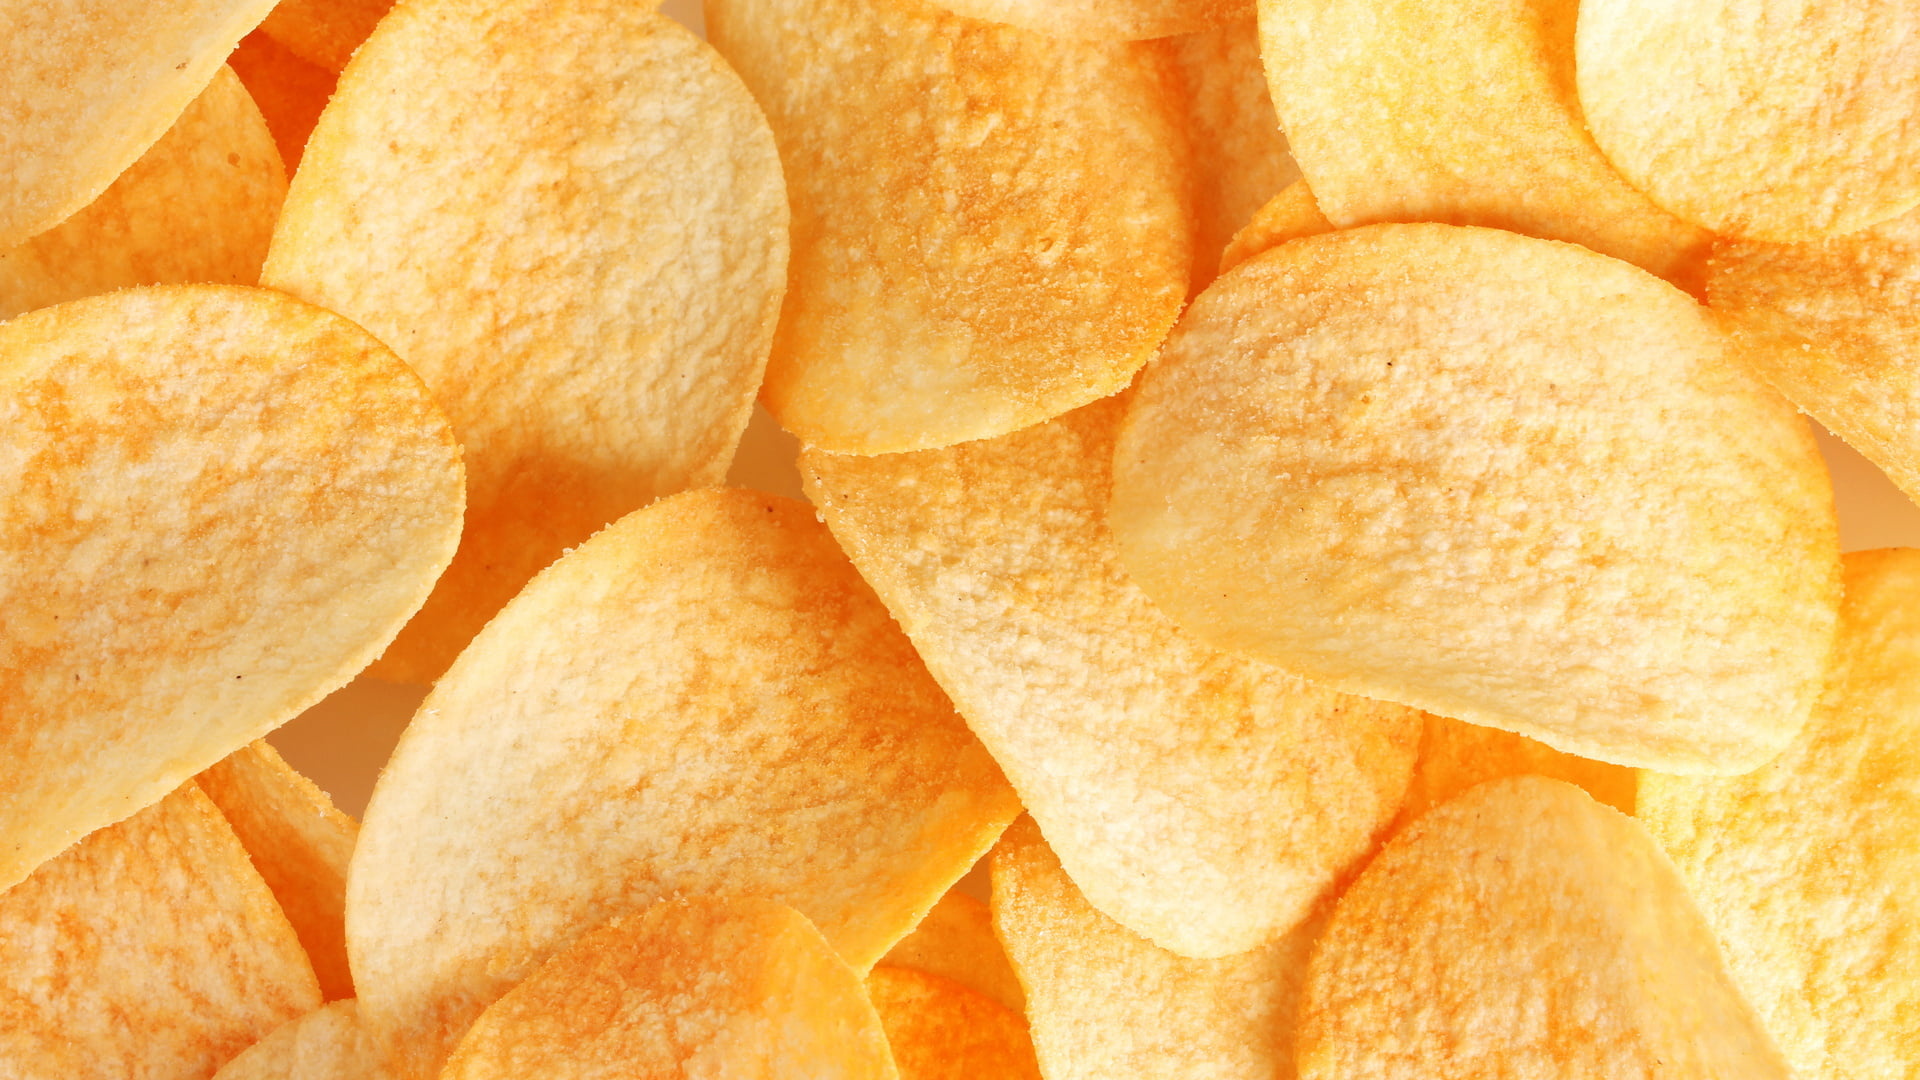 Crunchy potato chips, High-definition wallpaper, Snack time goodness, Crispy and irresistible, 1920x1080 Full HD Desktop